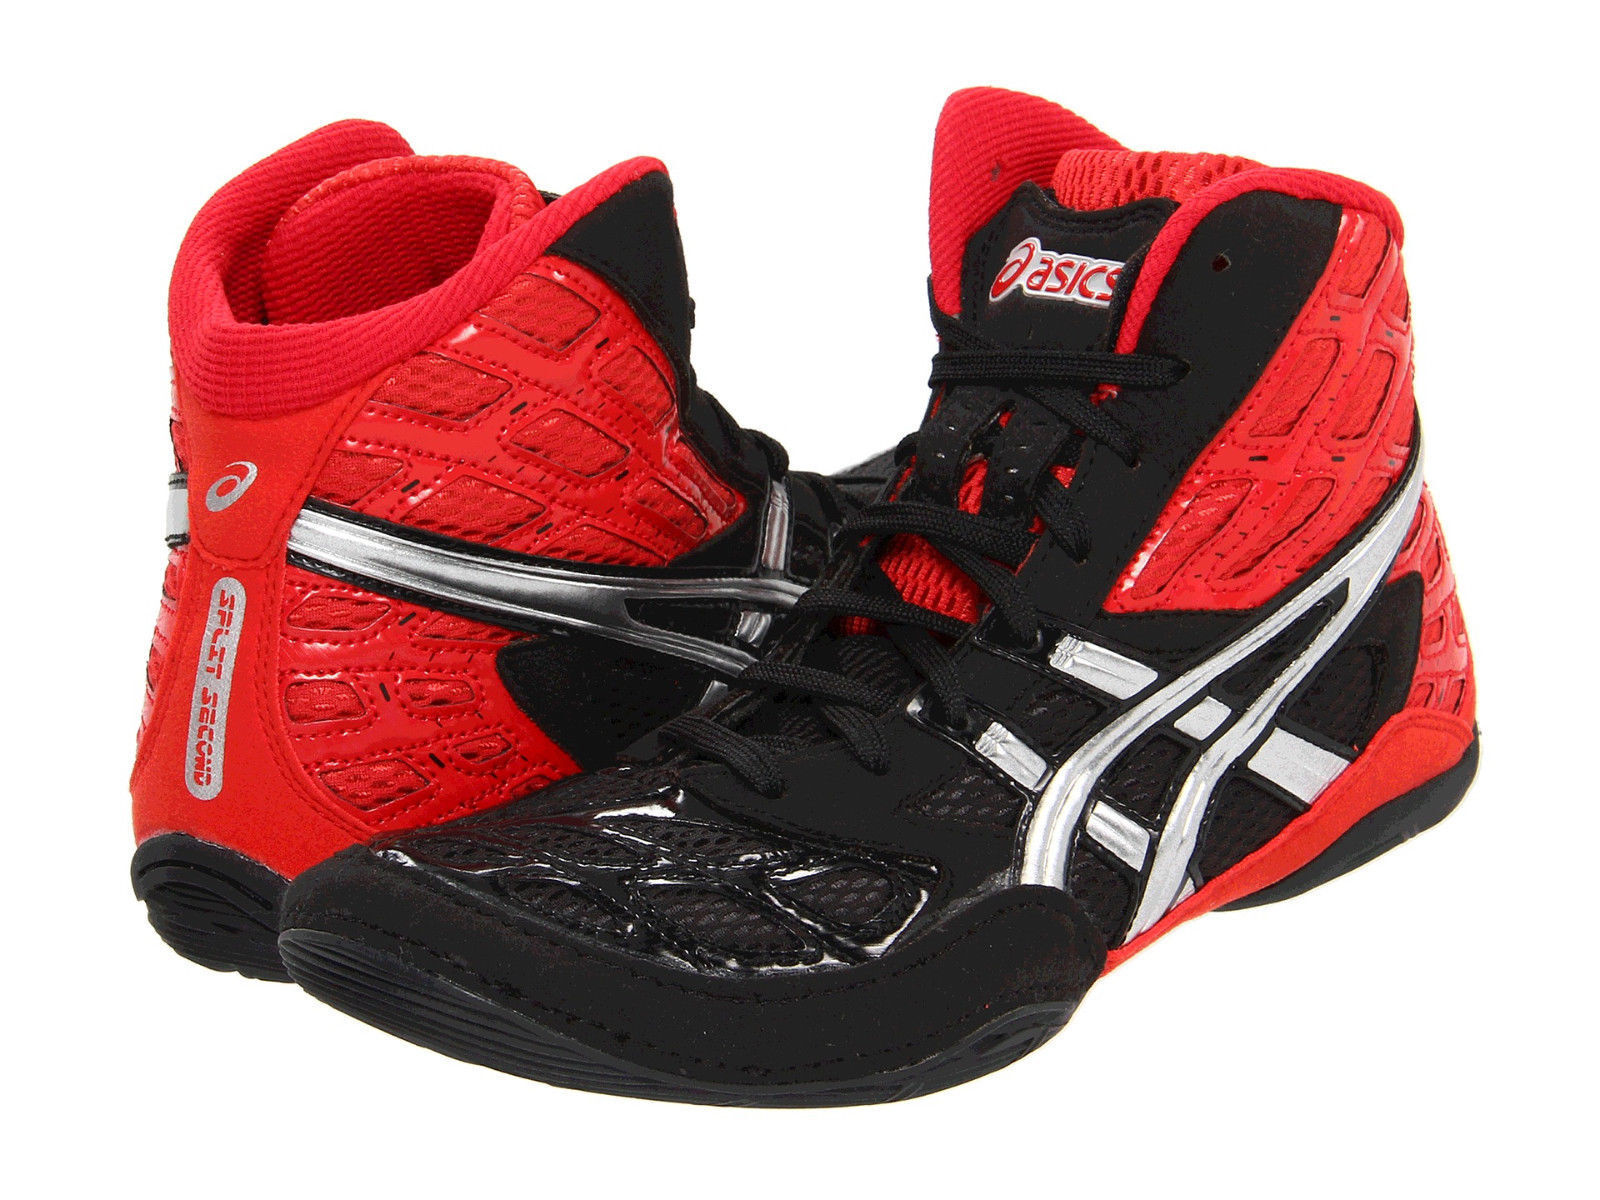 Top 10 Boxing Shoes eBay